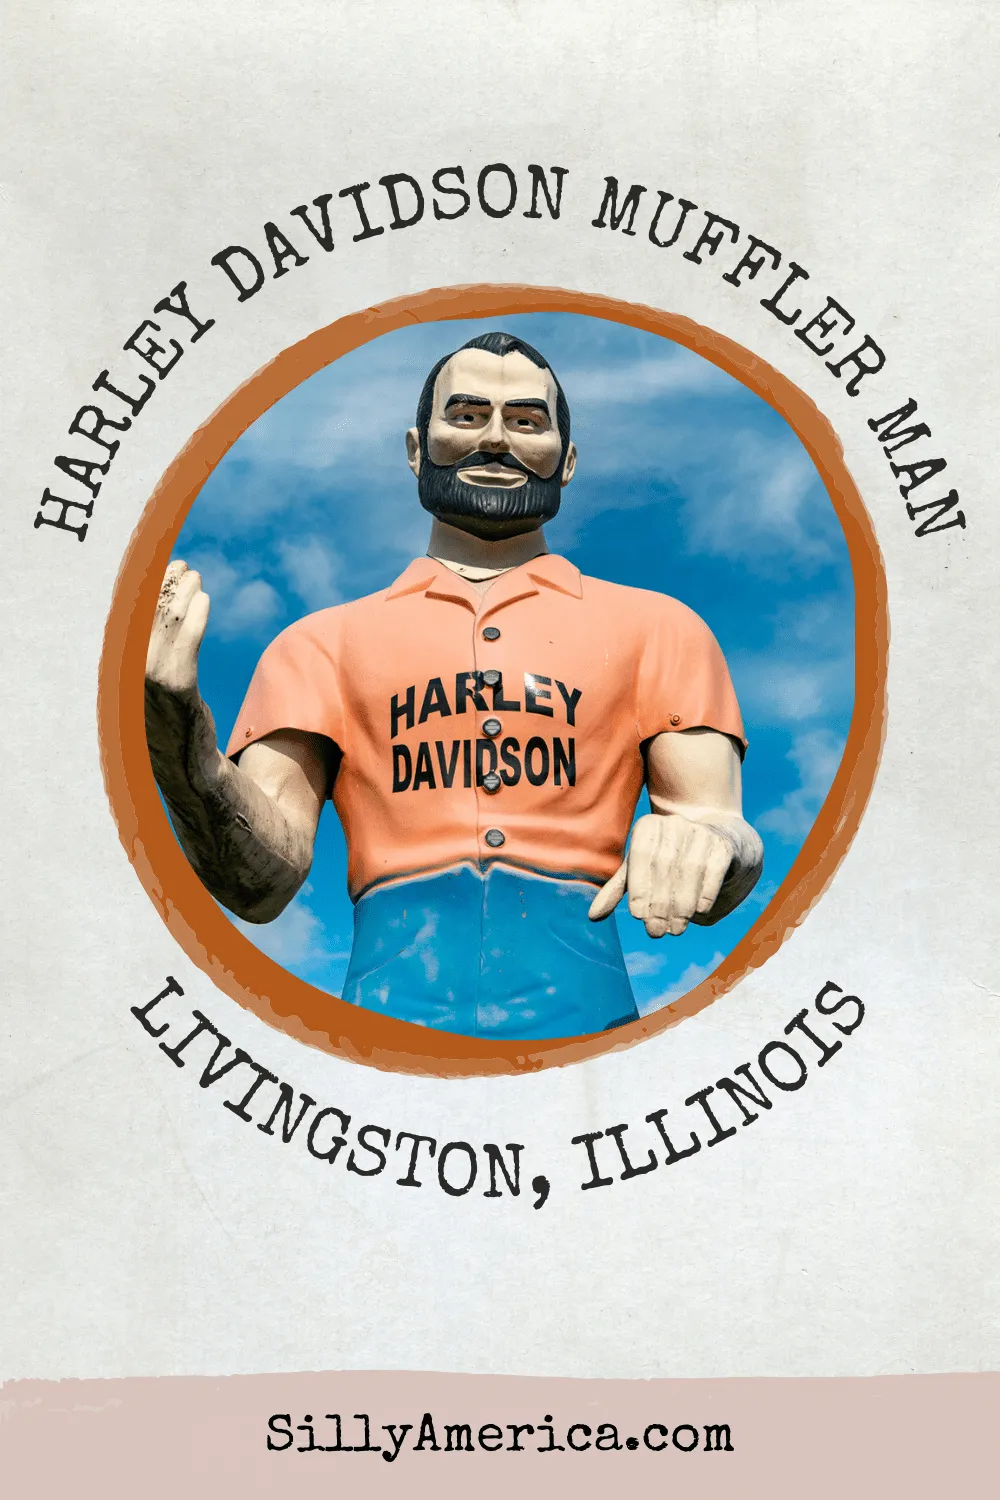 This roadside attraction is a muffler man turned motorcycle man. The giant biker can be found at the Pink Elephant Antique Mall in Livingston, Illinois: the Harley Davidson Muffler Man. Visit this Route 66 roadside attraction on an Illinois road trip.  #RoadTrips #RoadTripStop #Route66 #Route66RoadTrip #IllinoisRoute66 #Illinois #IllinoisRoadTrip #IllinoisRoadsideAttractions #RoadsideAttractions #RoadsideAttraction #RoadsideAmerica #RoadTrip